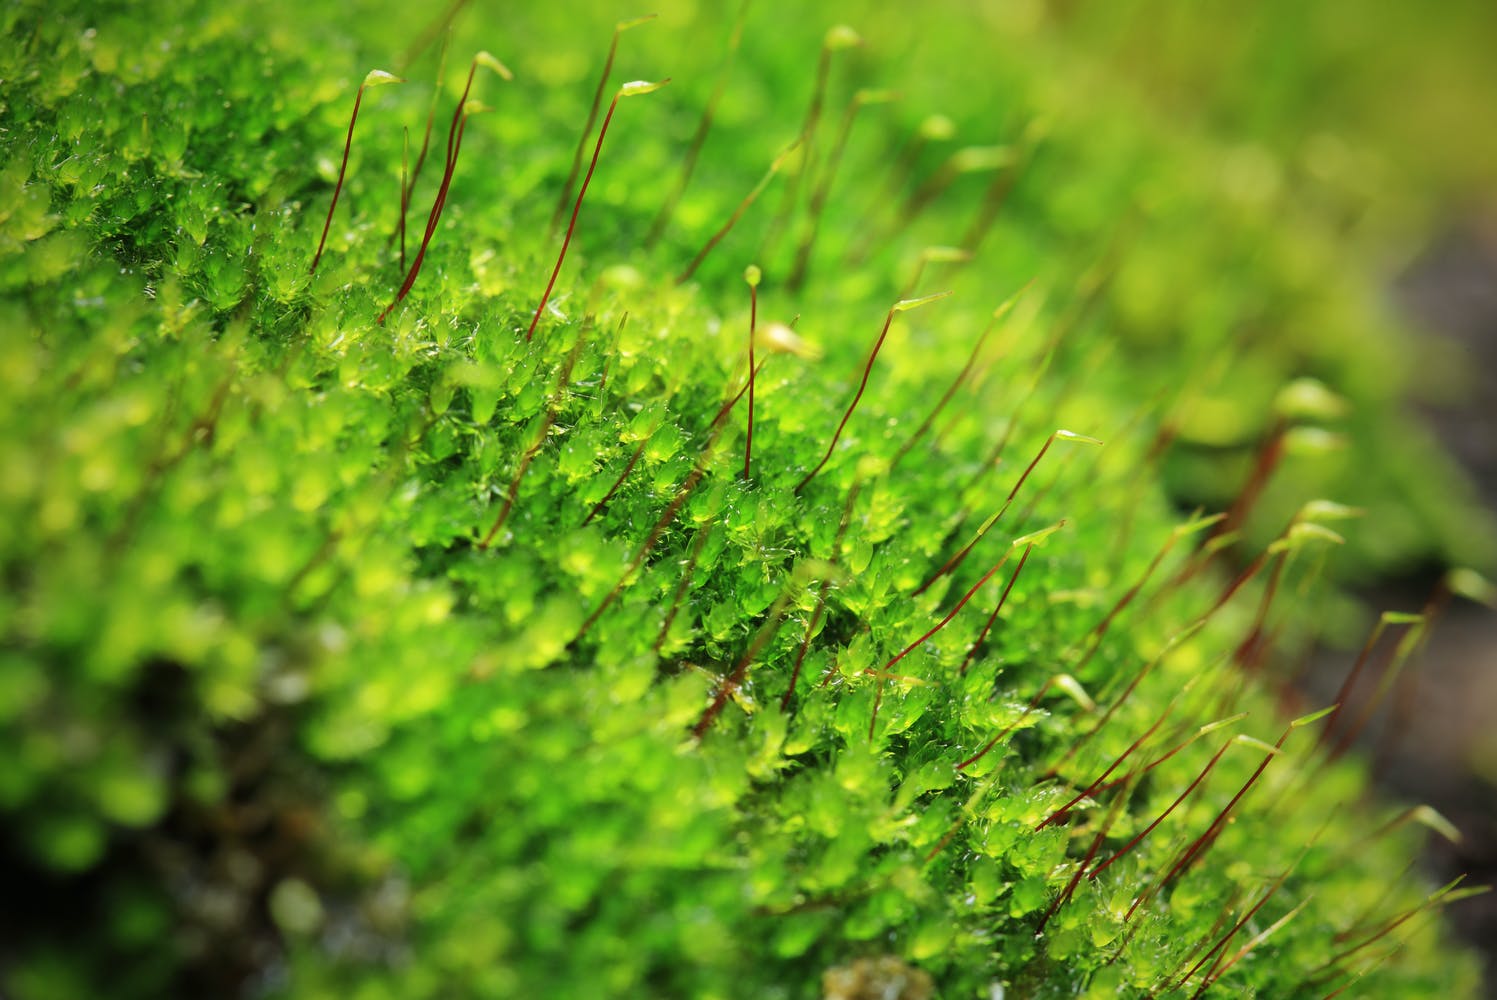 We found the genes that allowed plants to colonise land 500 million years ago